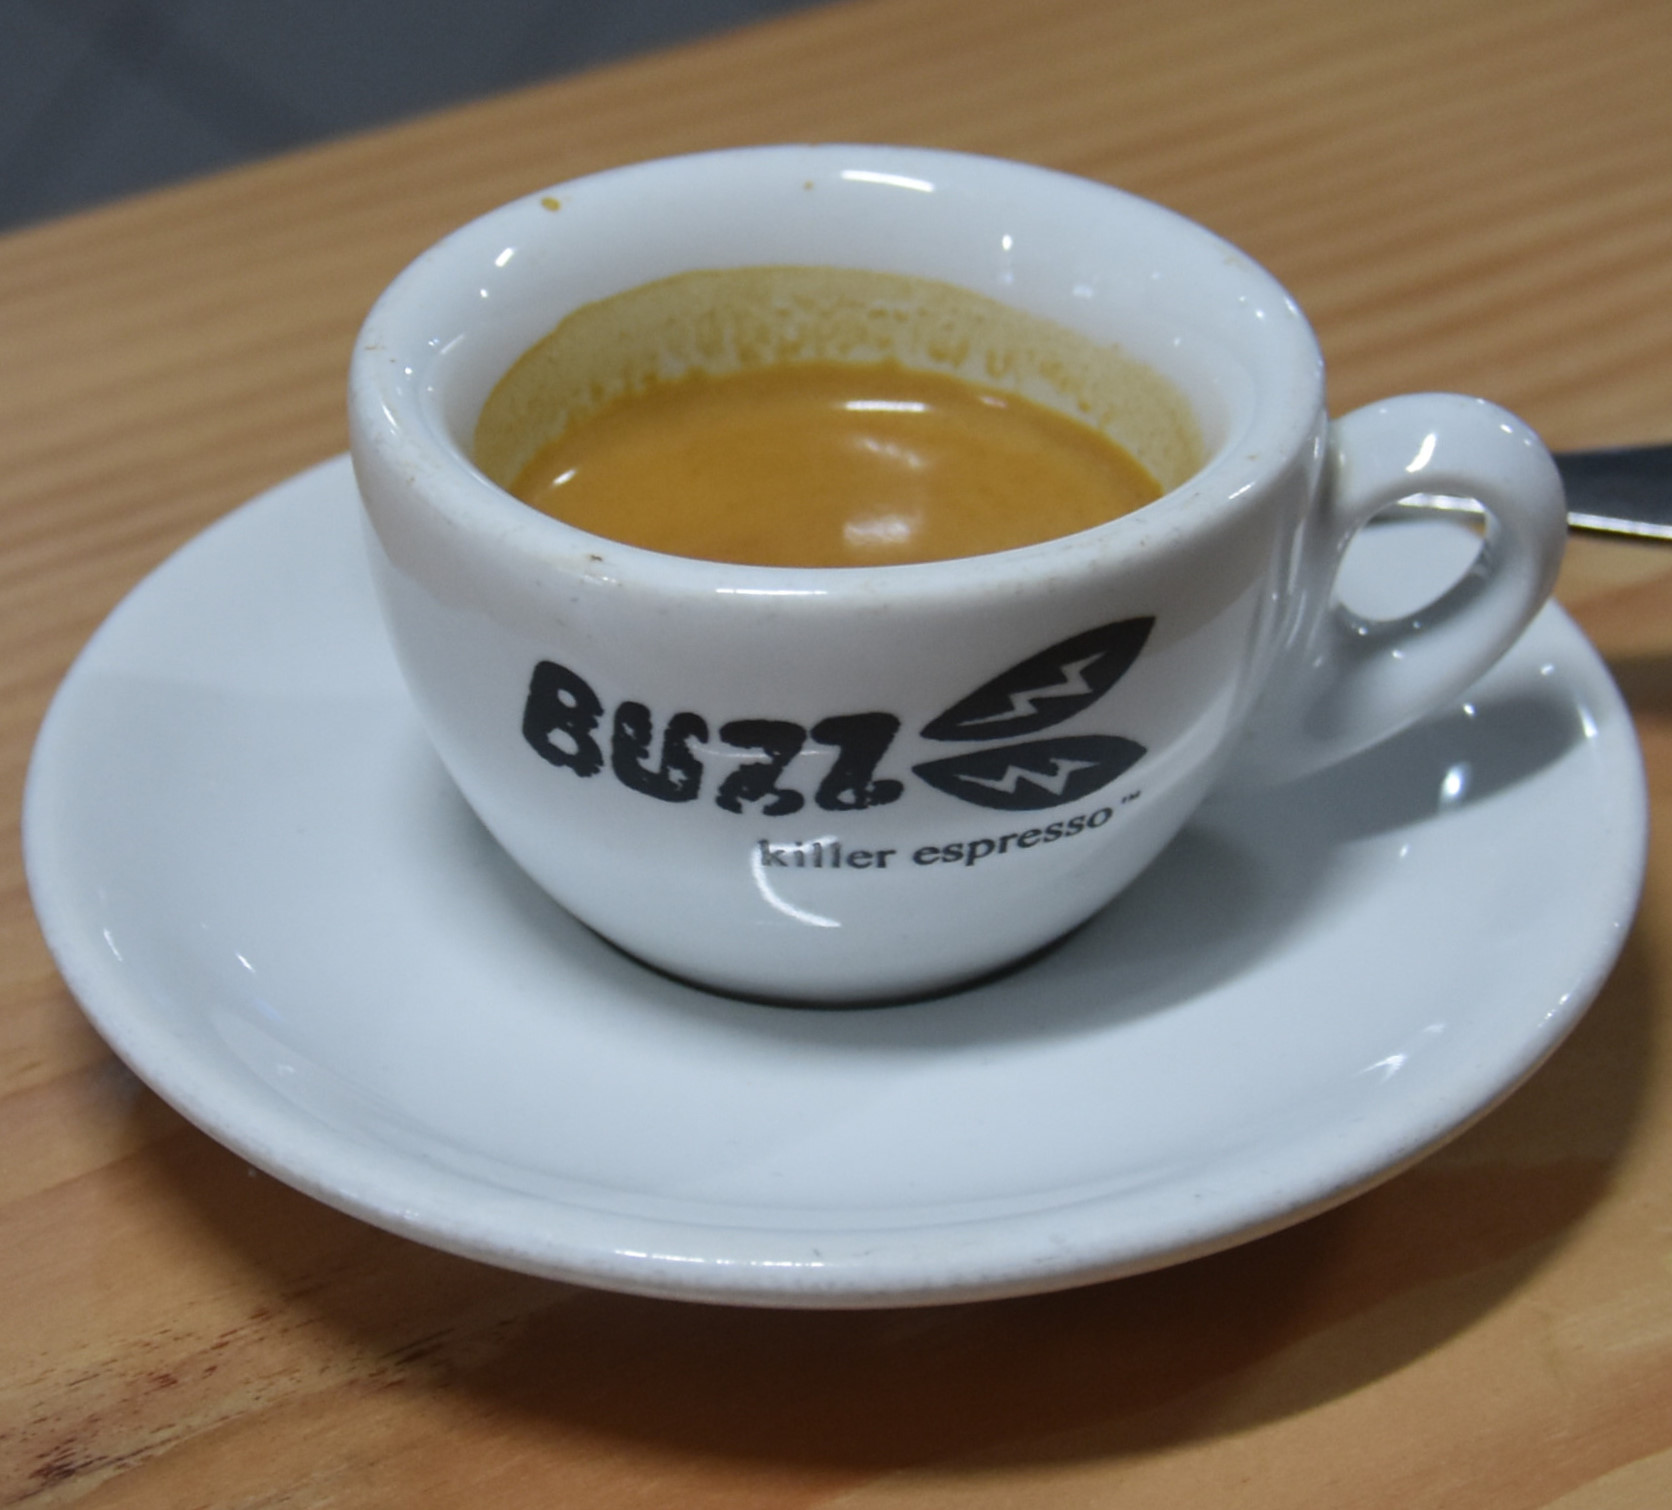 A lovely shot of espresso in an old Buzz Killer Espresso cup, made with the NCK blend at Buzz Coffee & Baker.